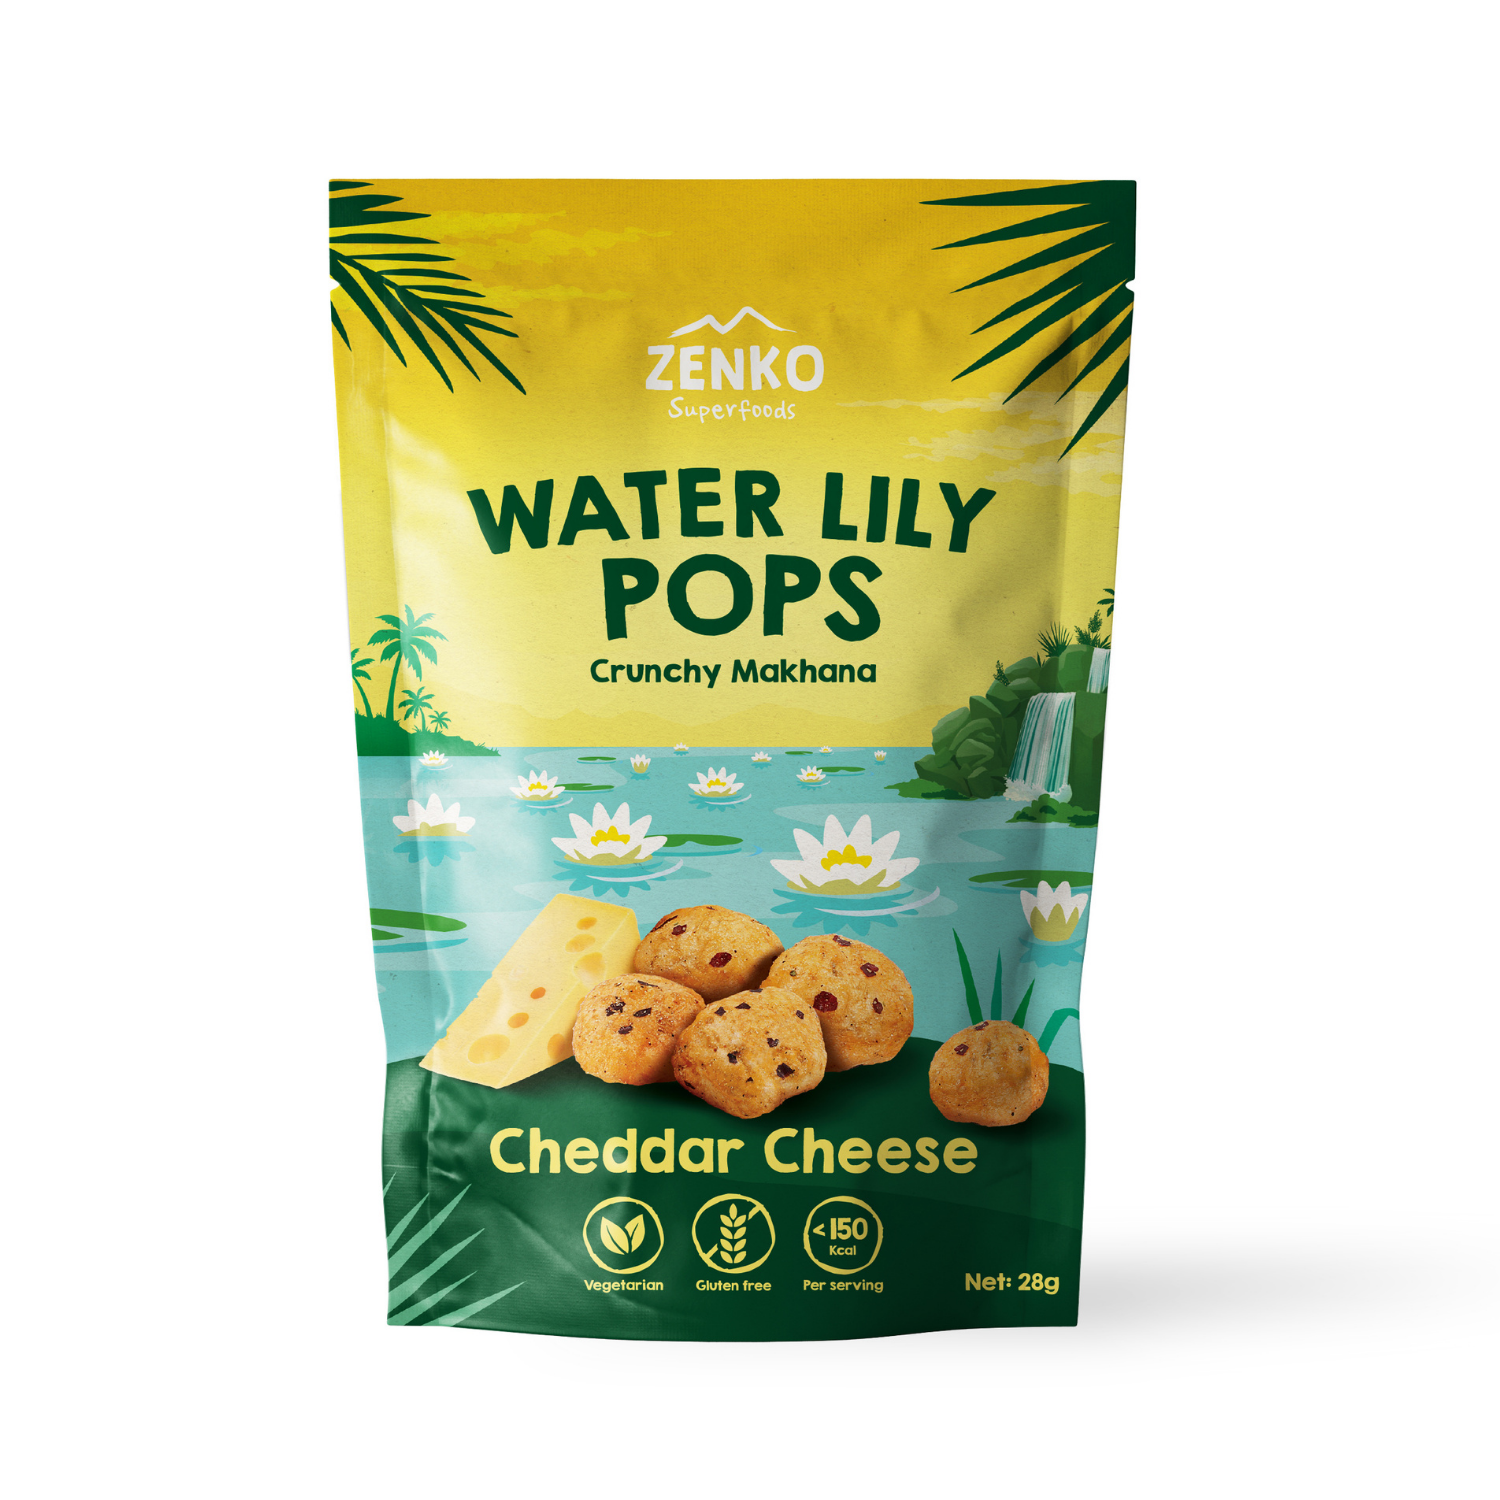 Zenko Superfoods Water Lily Pops - Cheddar Cheese, 28g